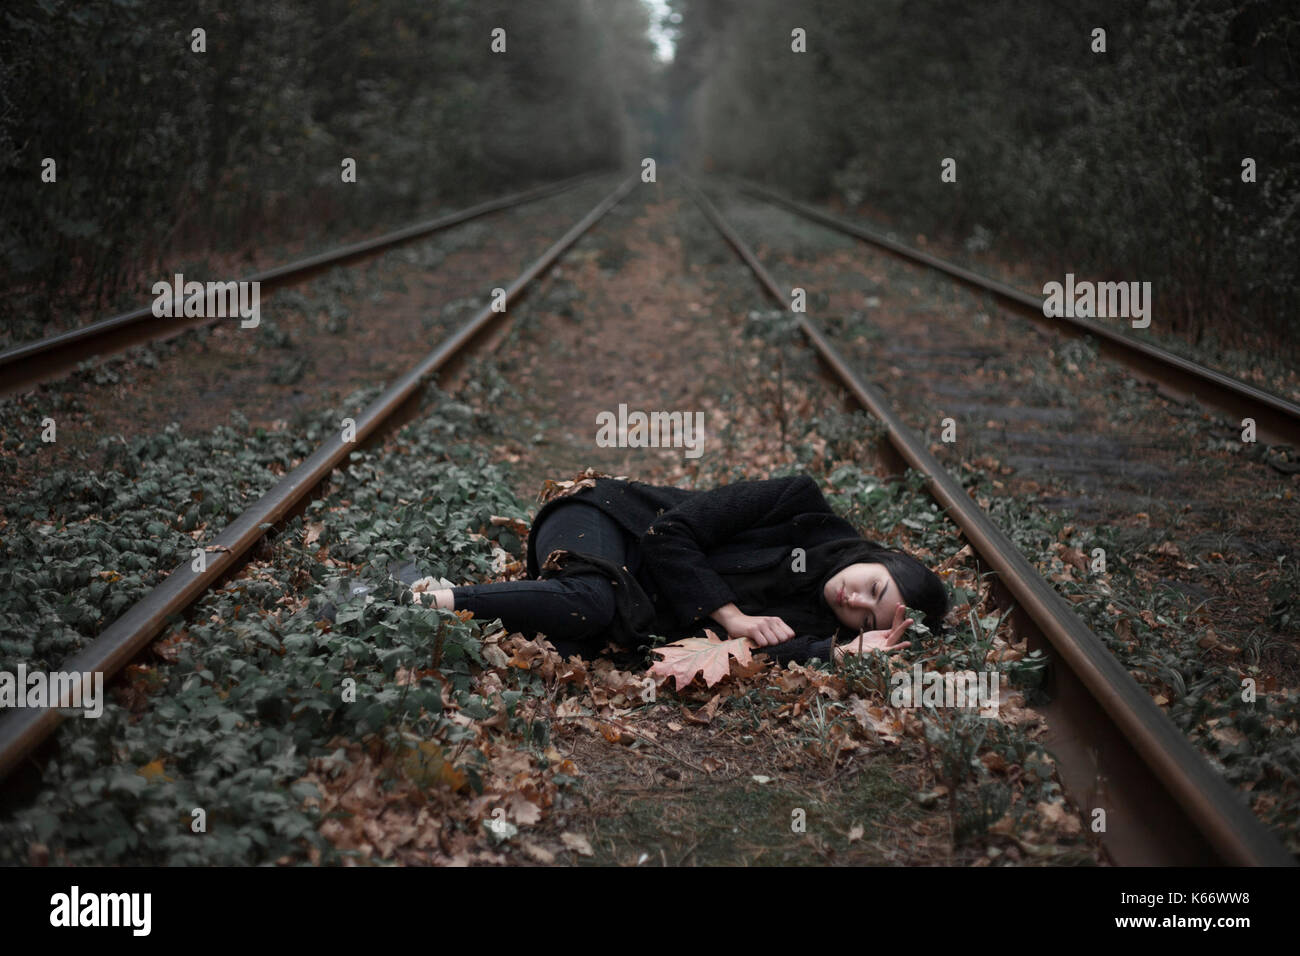 Caucasian woman laying on autumn leaves near train tracks in forest Stock Photo